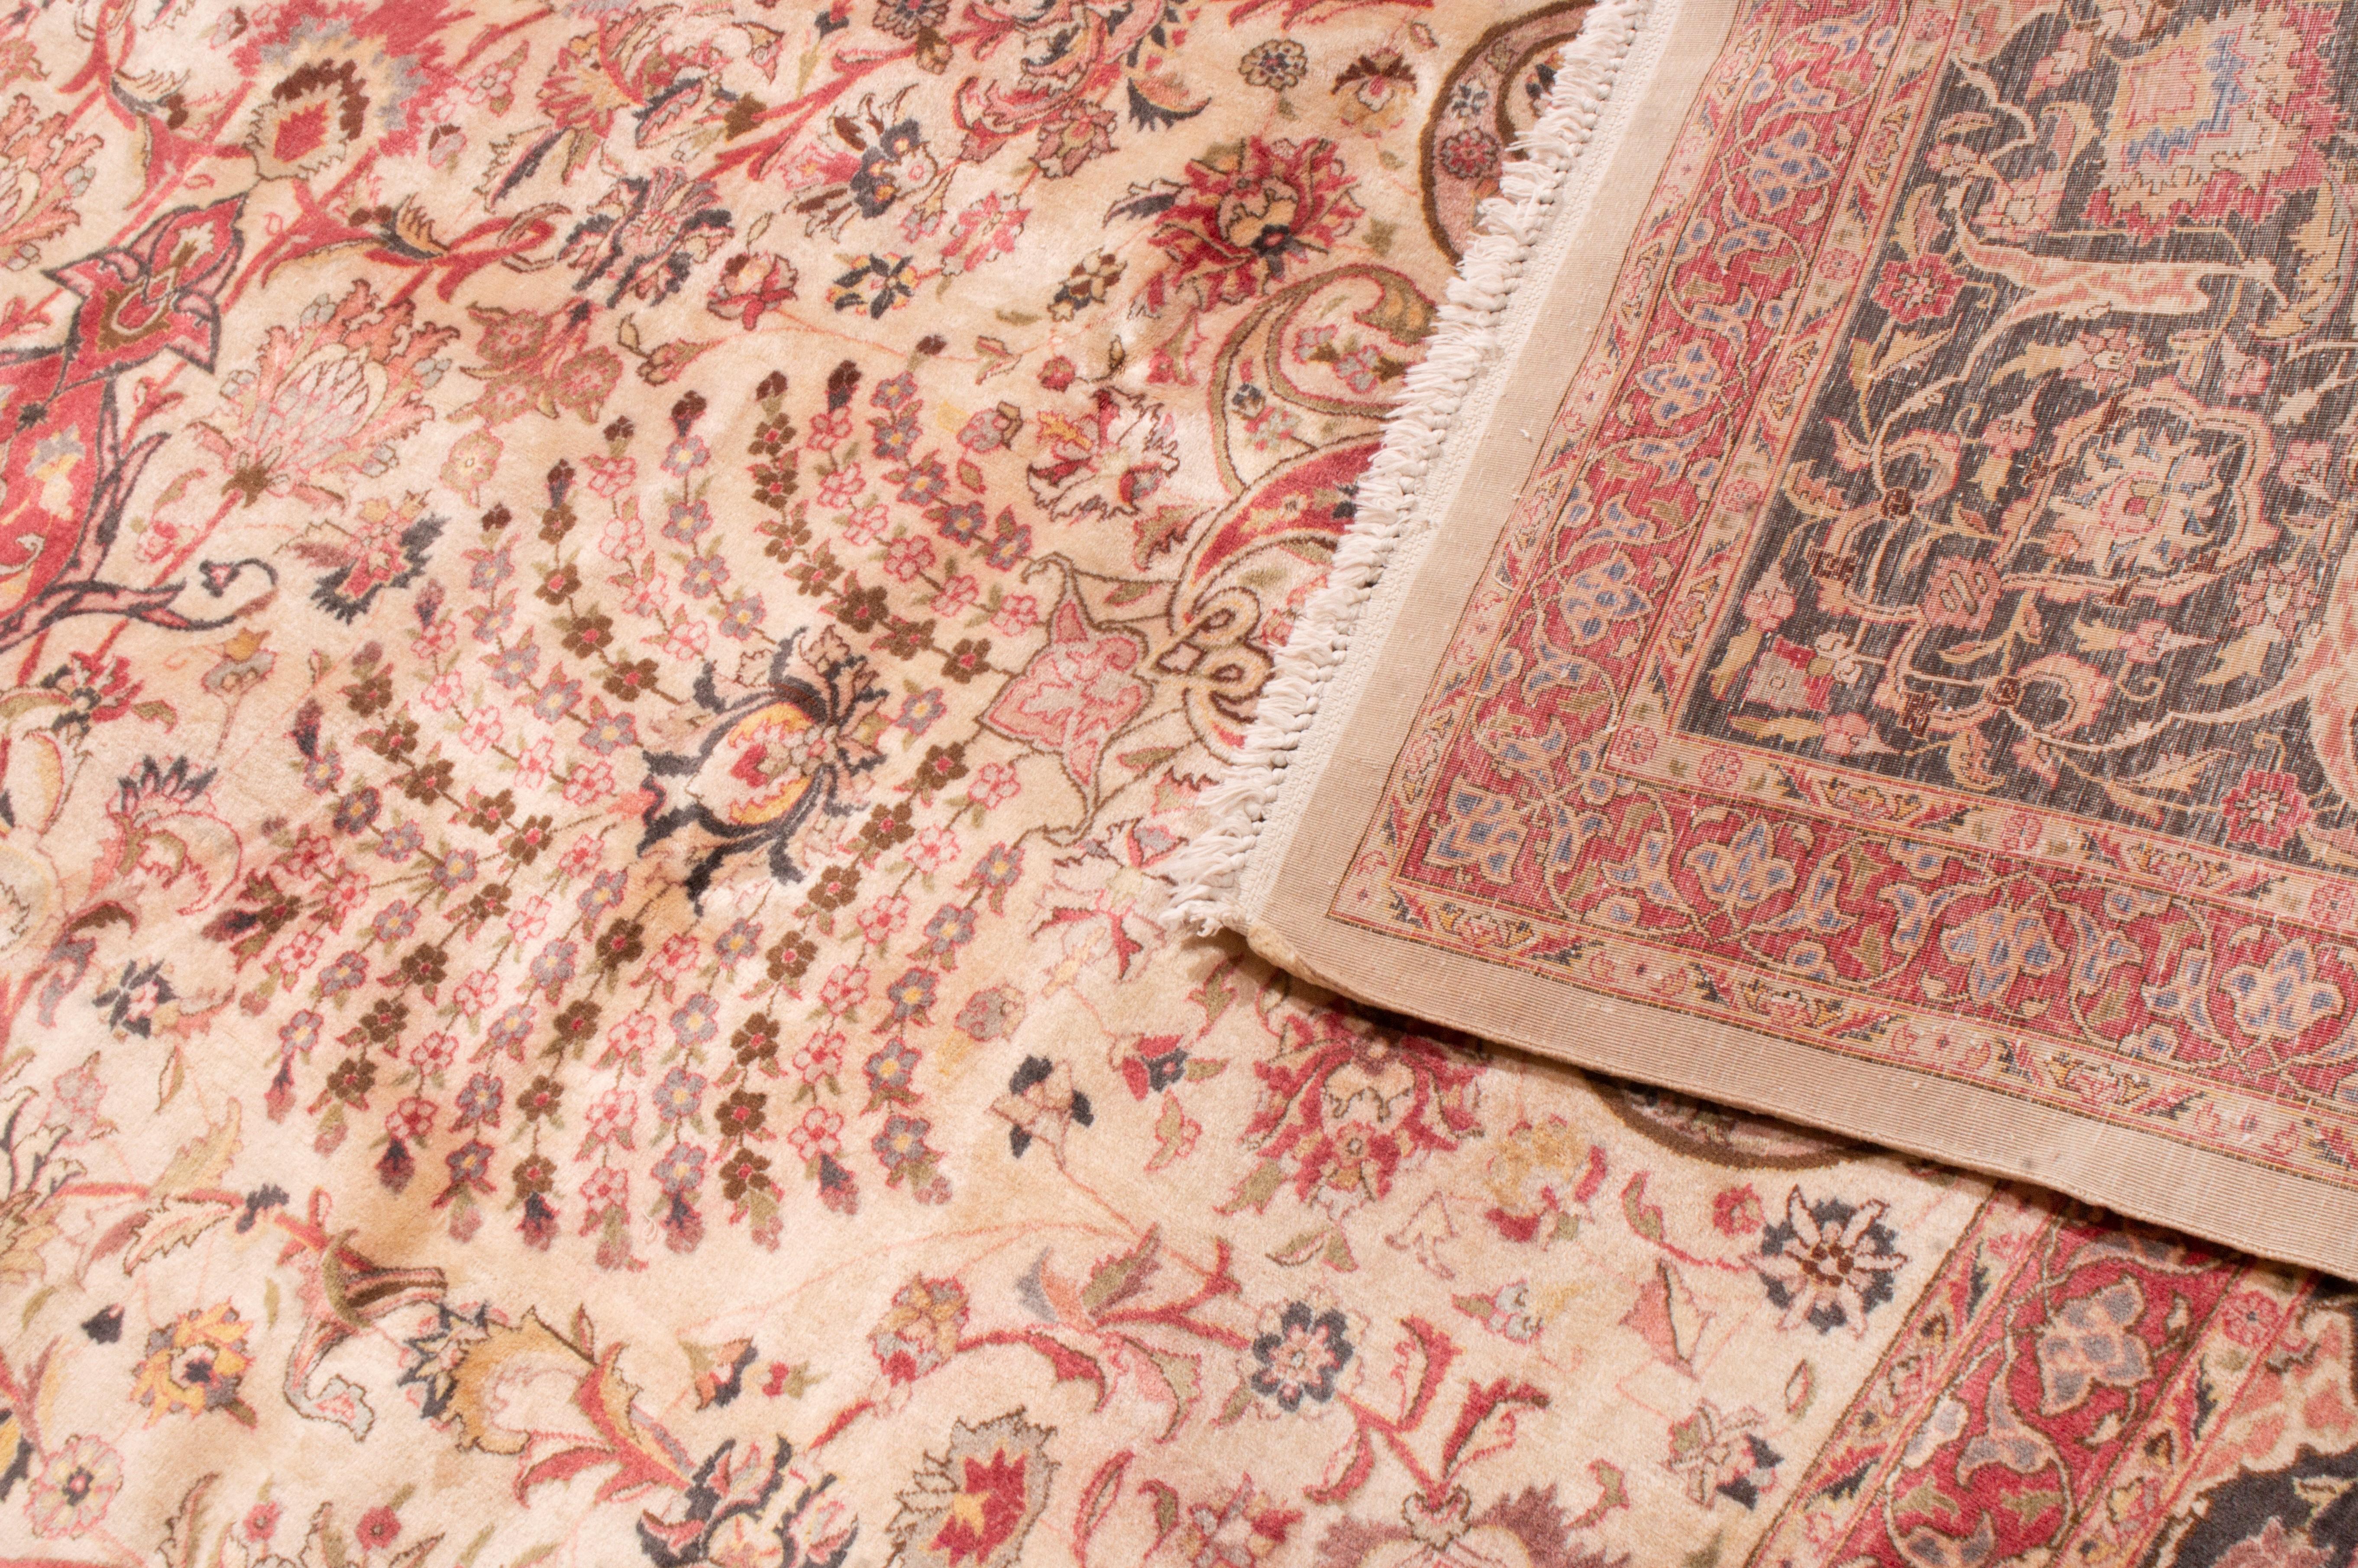 Antique Tabriz Medallion-Style Pink Wool Rug with Floral Patterns In Good Condition For Sale In Long Island City, NY